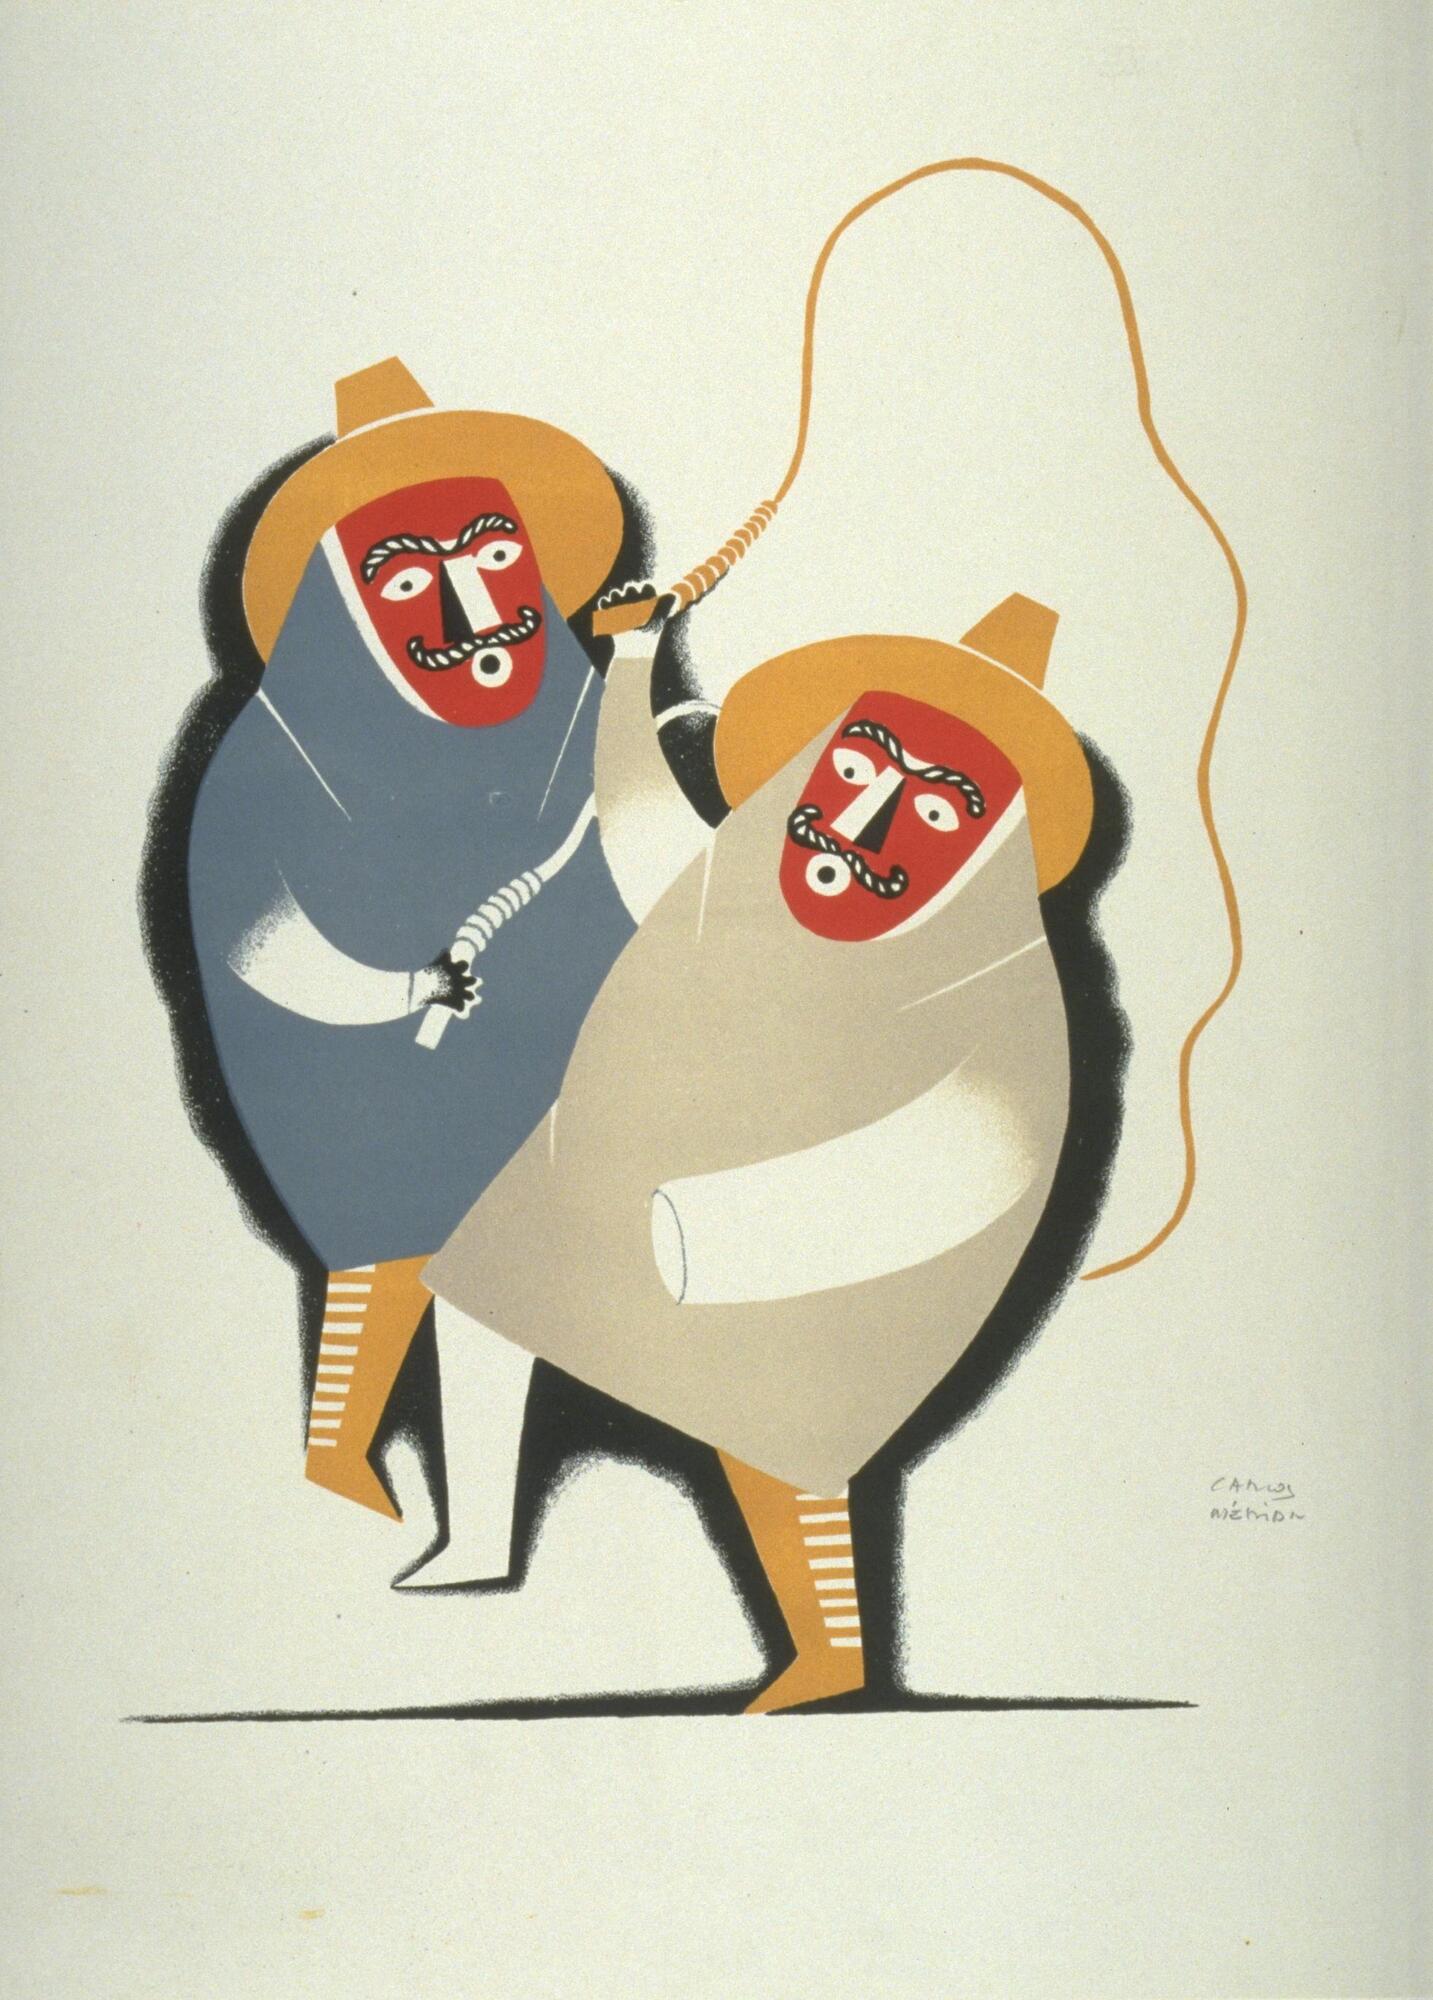 Centered on the page, this print shows two figures. The one in the foreground is wearing a grey cloak, while the one in the back has a blue cloak. Both figures have one orange boot, and orange hats. Also both figures are wearing red masks with stylized mustached-faces. The front figure holds an orange whip, and the back figure holds a white whip.